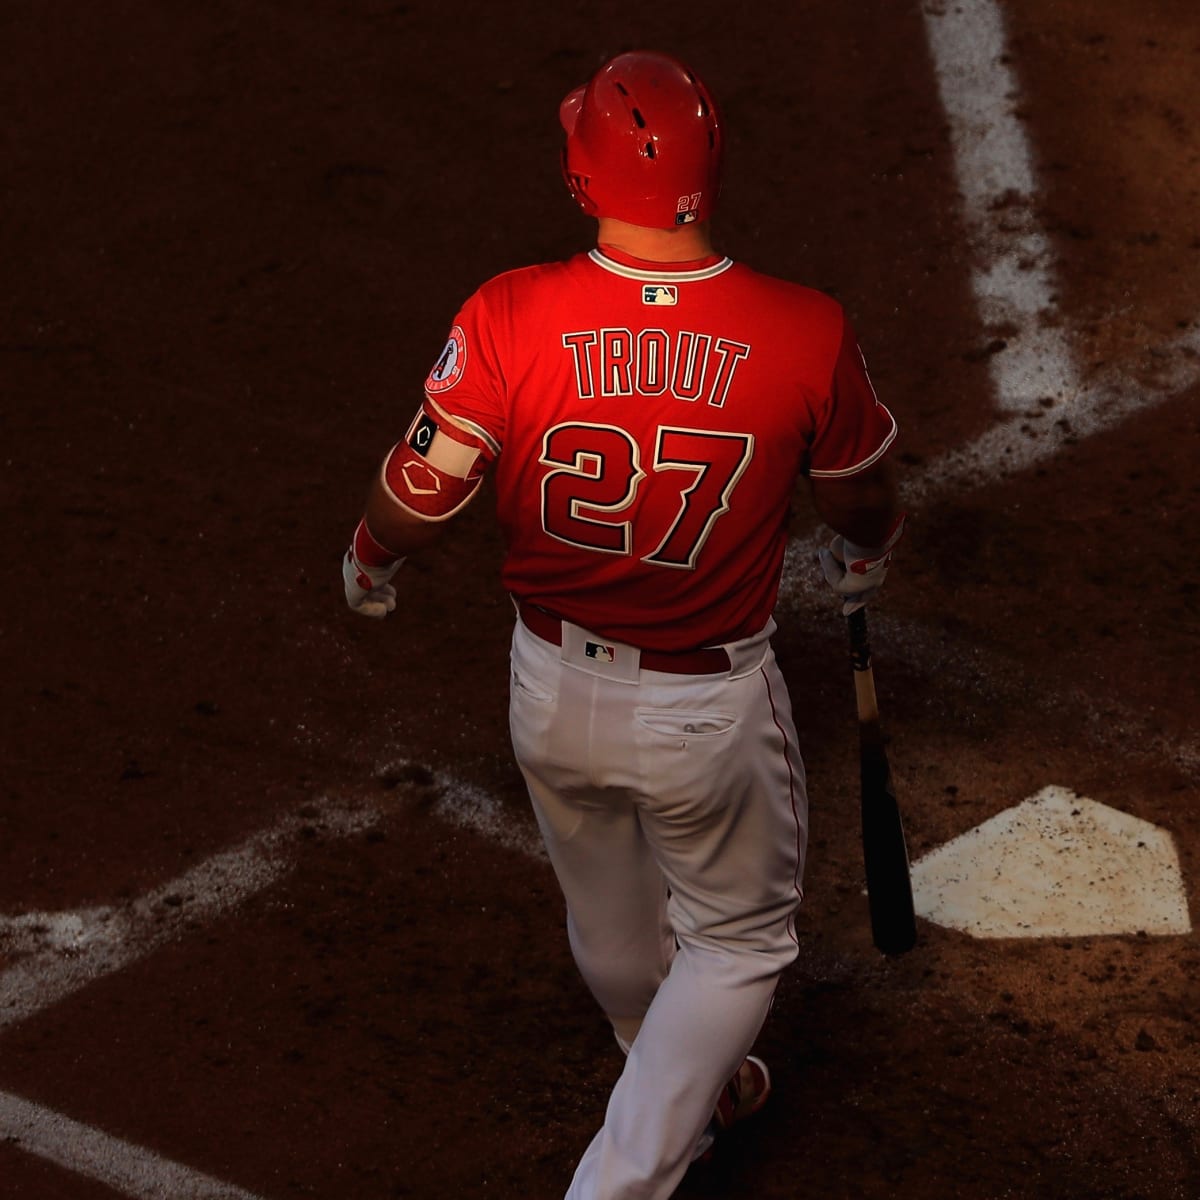 Why doesn't anyone care about Mike Trout?